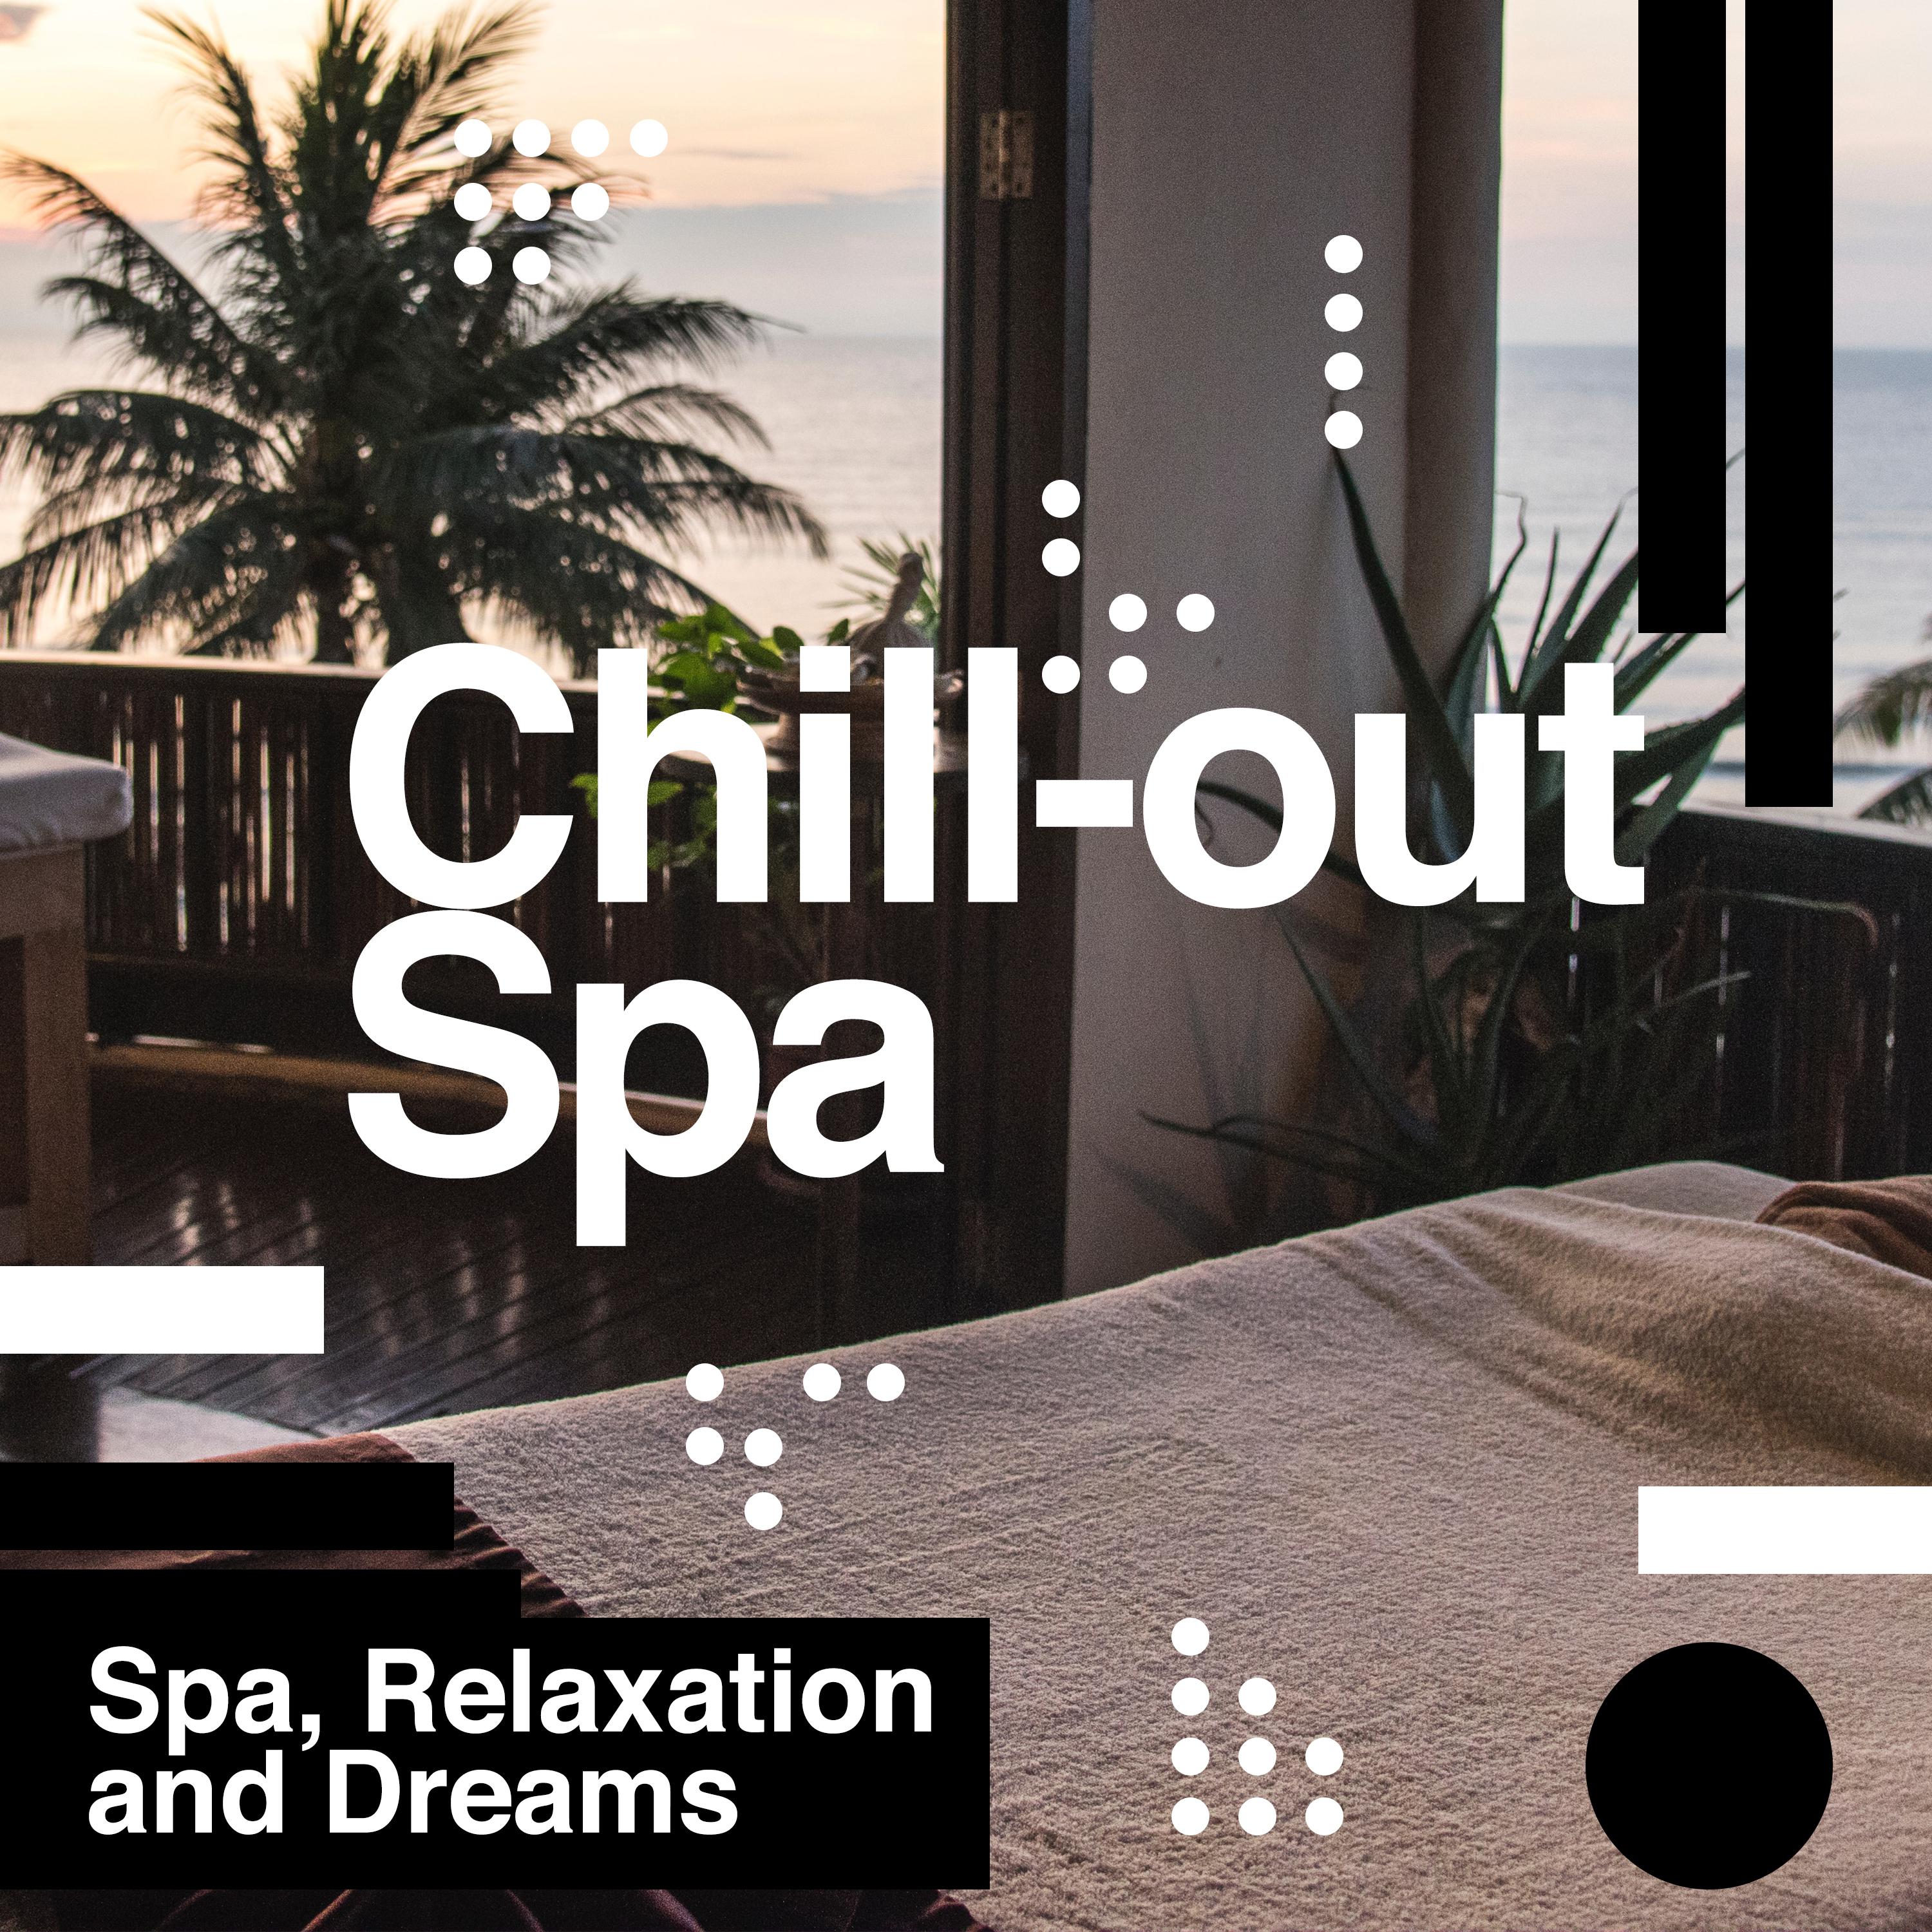 Chill-out Spa